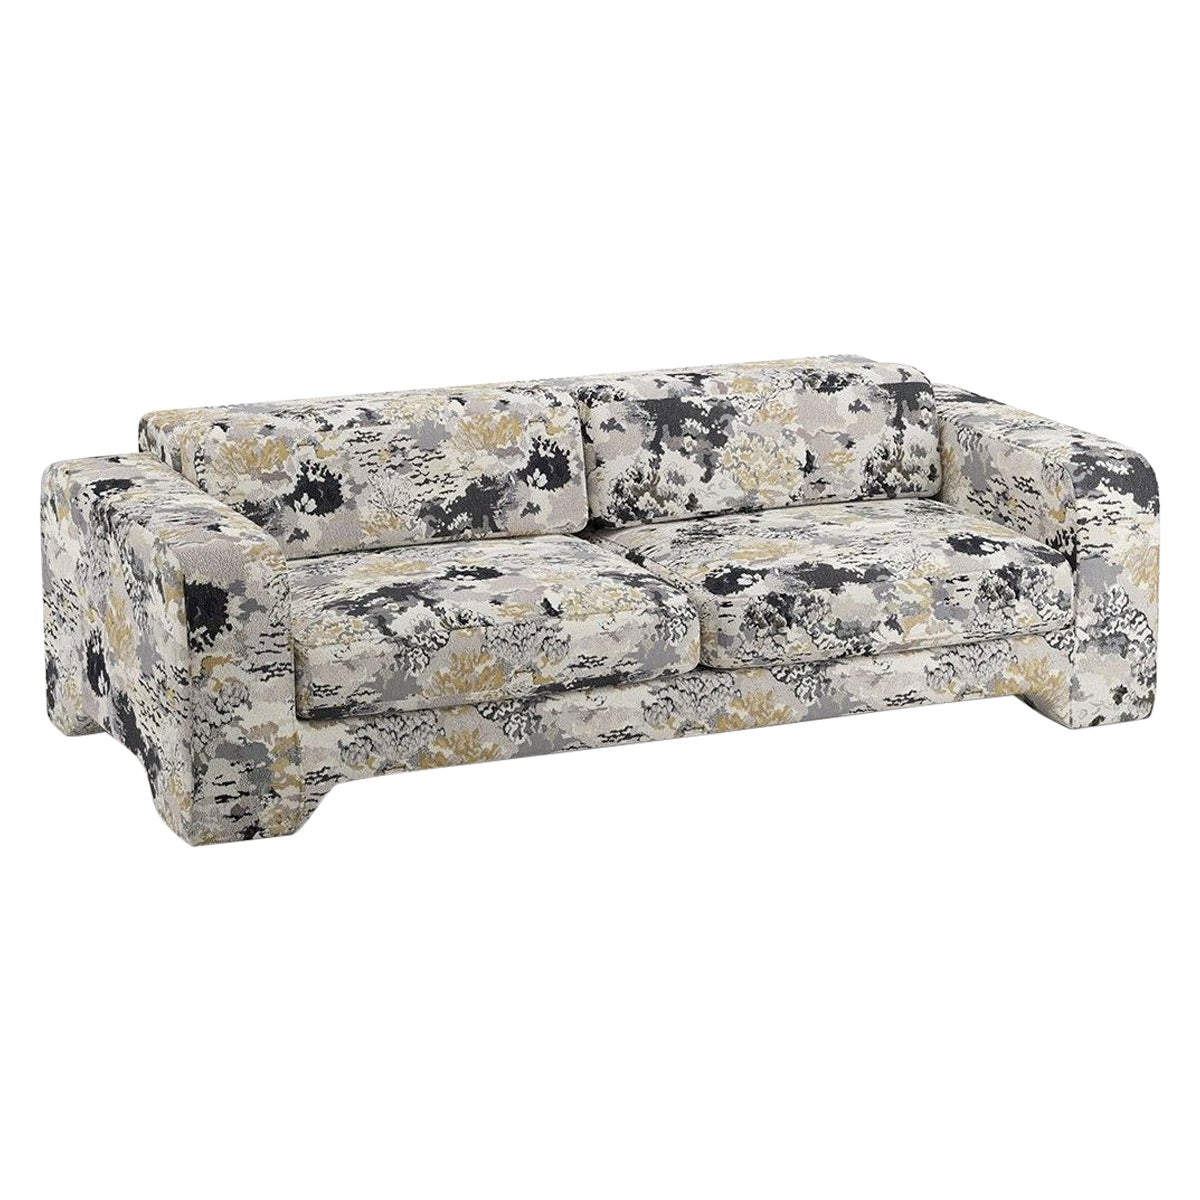 Popus Editions Giovanna 3 Seater Sofa in Charcoal Marrakech Jacquard Fabric For Sale